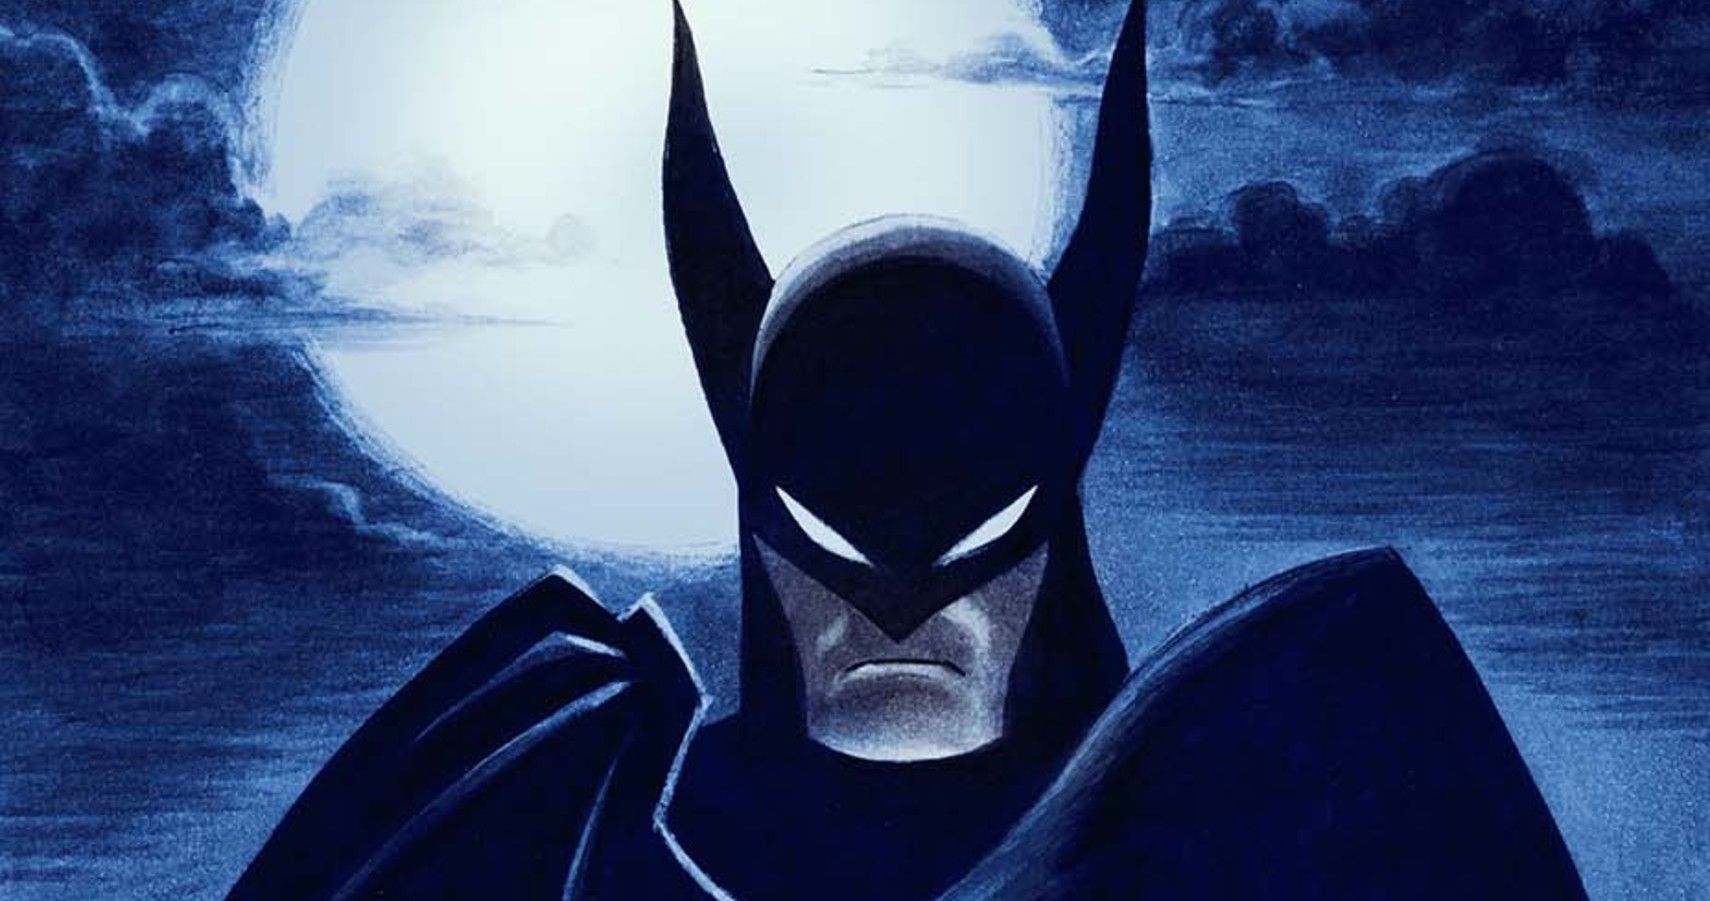 Batman Caped Crusader Is A New Animated Take On The Dark Knight Coming To HBO Max